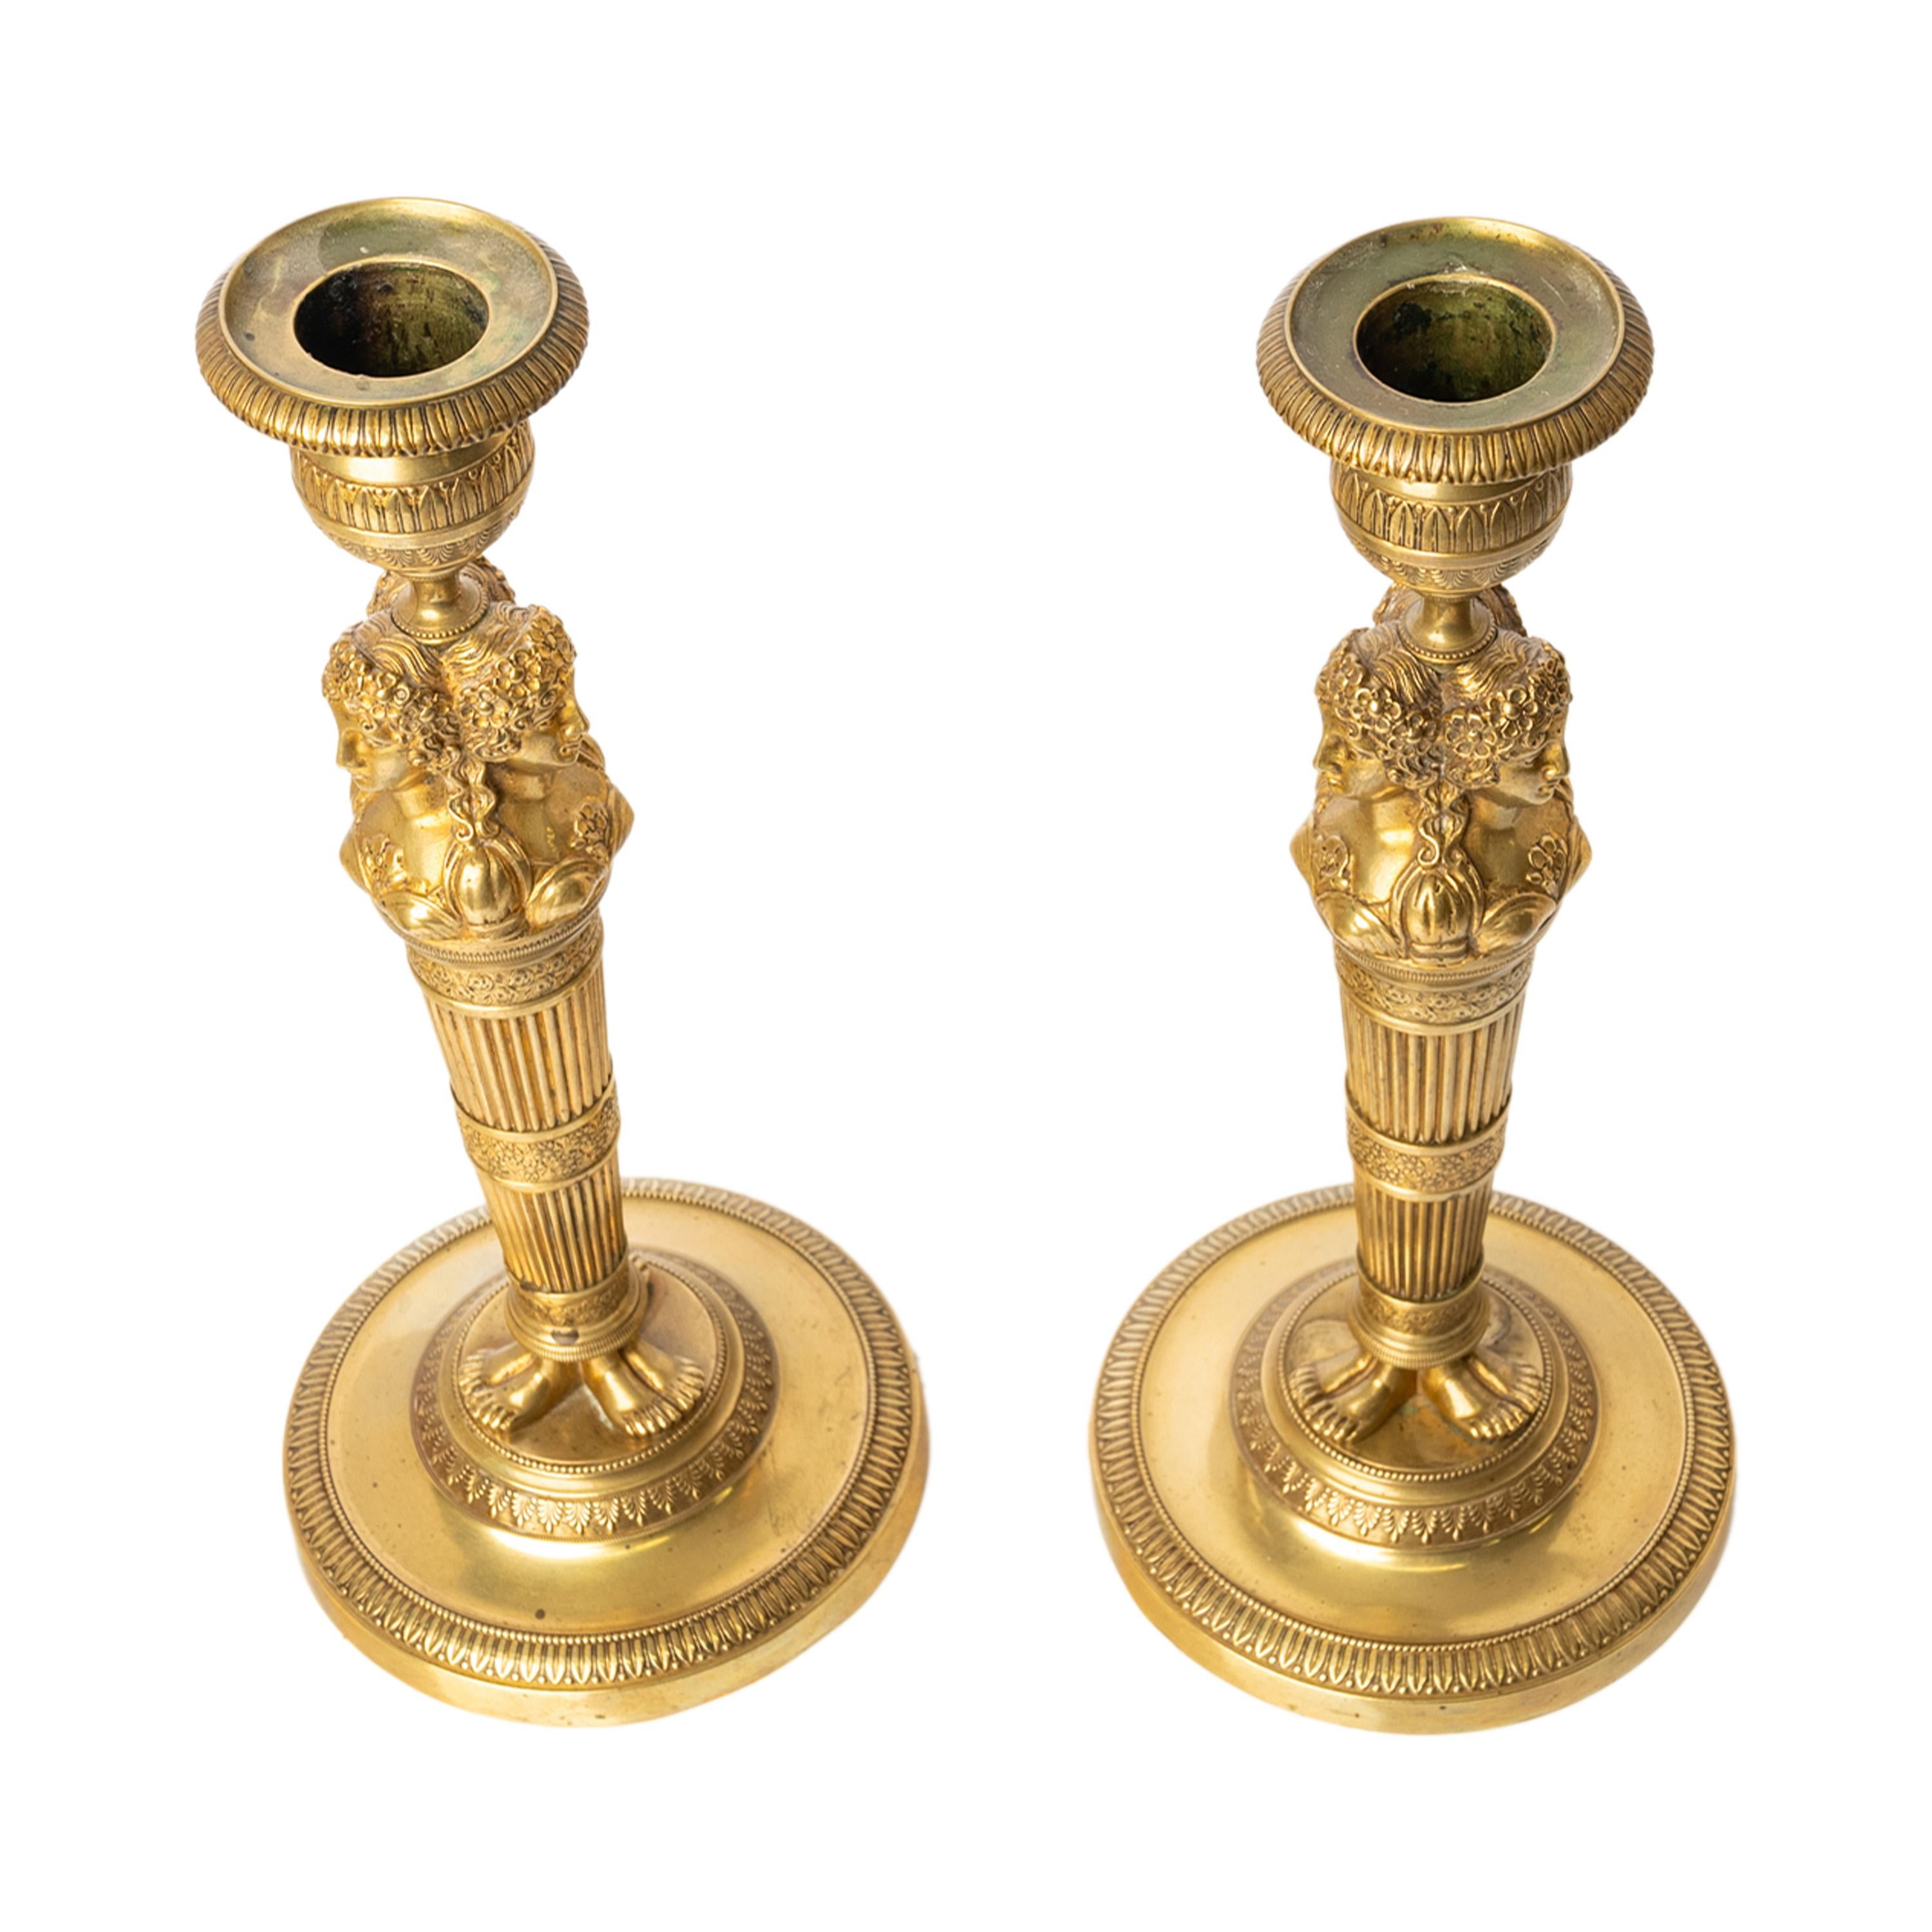 Pair Antique Early 19thC French Empire Neoclassical Gilt Bronze Candlesticks In Good Condition For Sale In Portland, OR